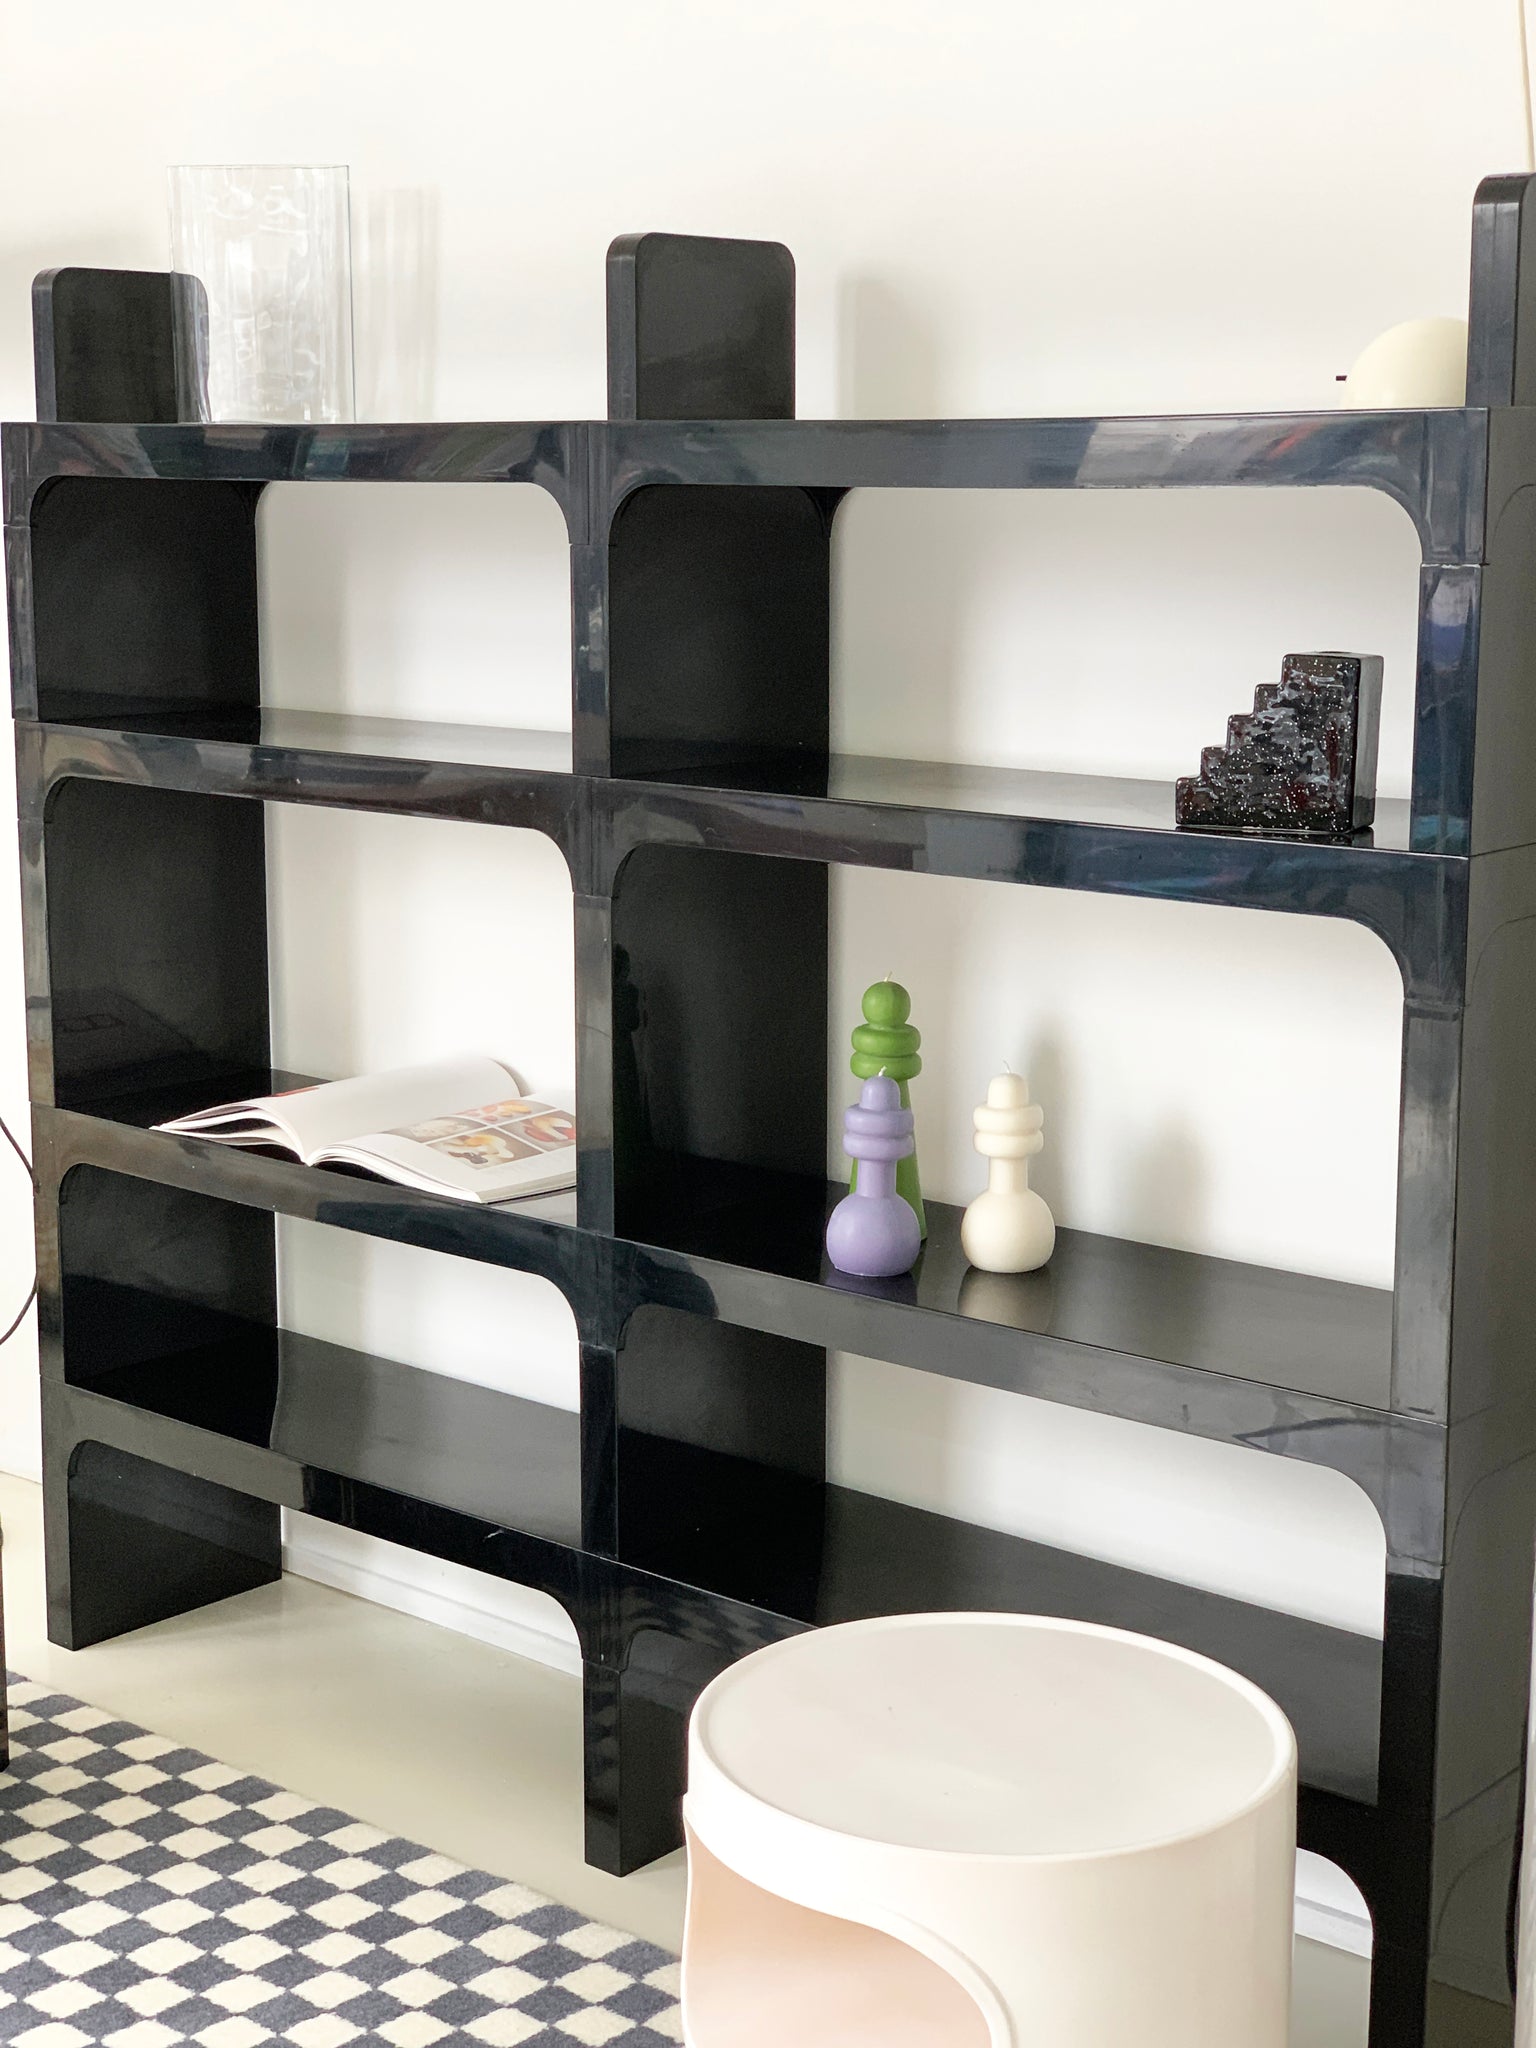 1970s Black ABS Plastic Bookcase by Olaf Von Bohr for Kartell